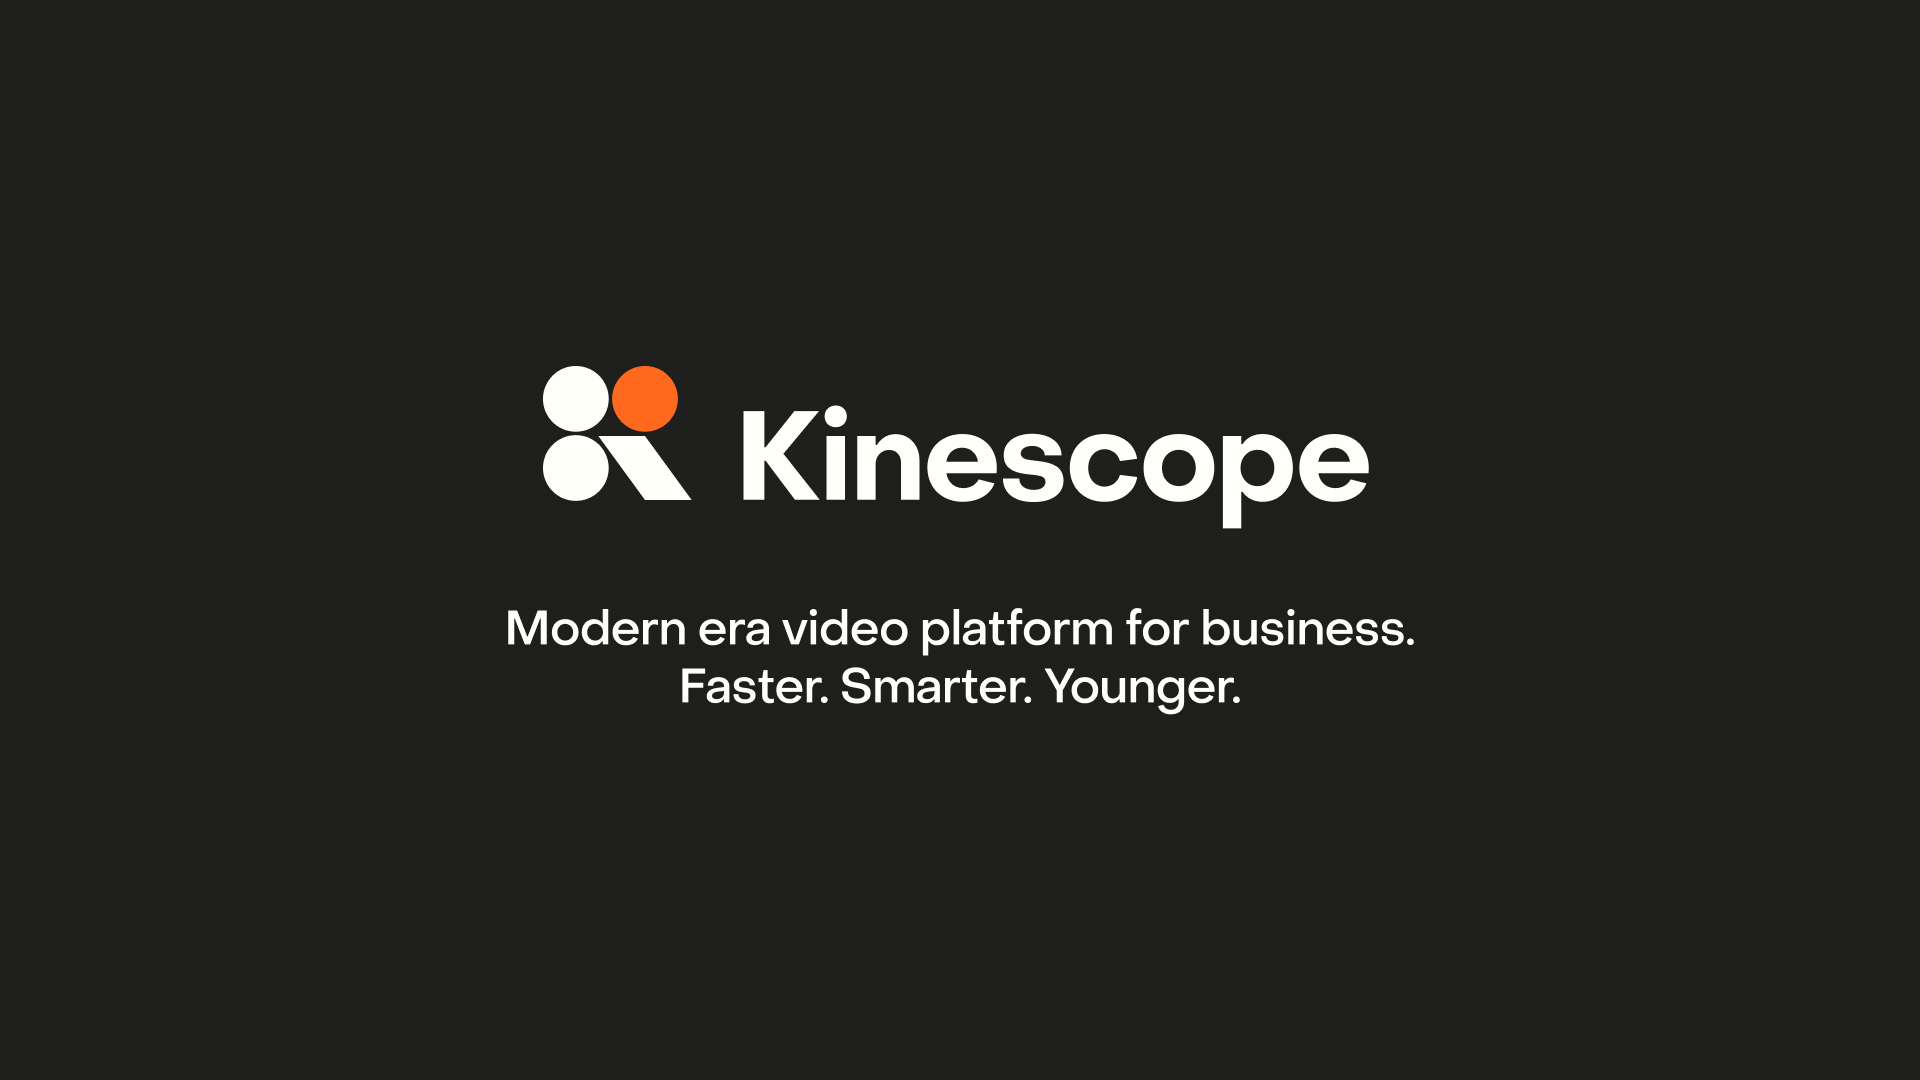 Brand Identity and Website for Video Platform Infrastructure Company Kinescope